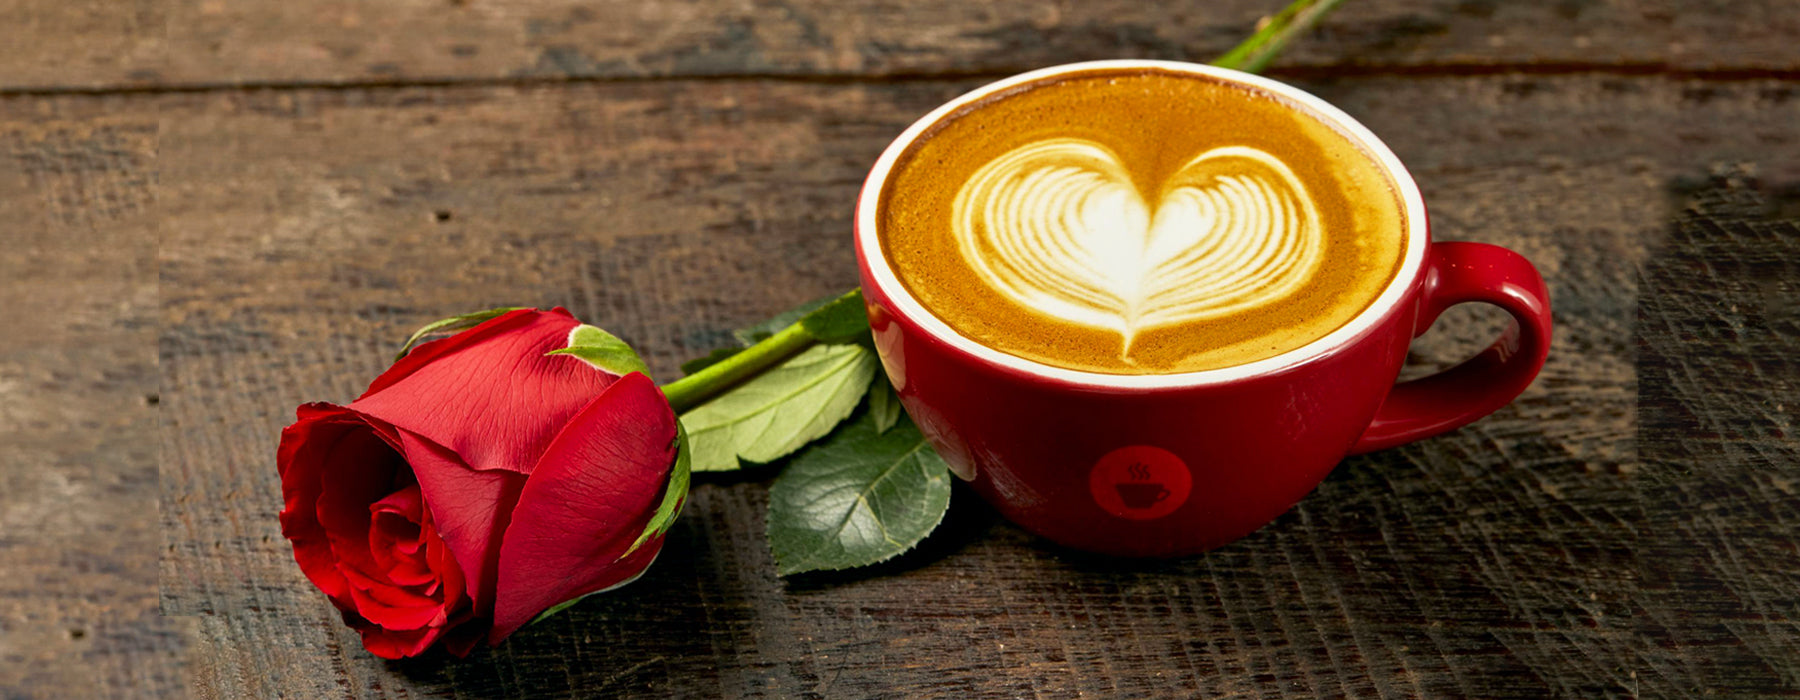 https://cdn.shopify.com/s/files/1/0293/4380/9620/files/espresso-works-blog-a-valentines-gift-guide-for-coffee-lovers-banner.jpg?v=1612169204